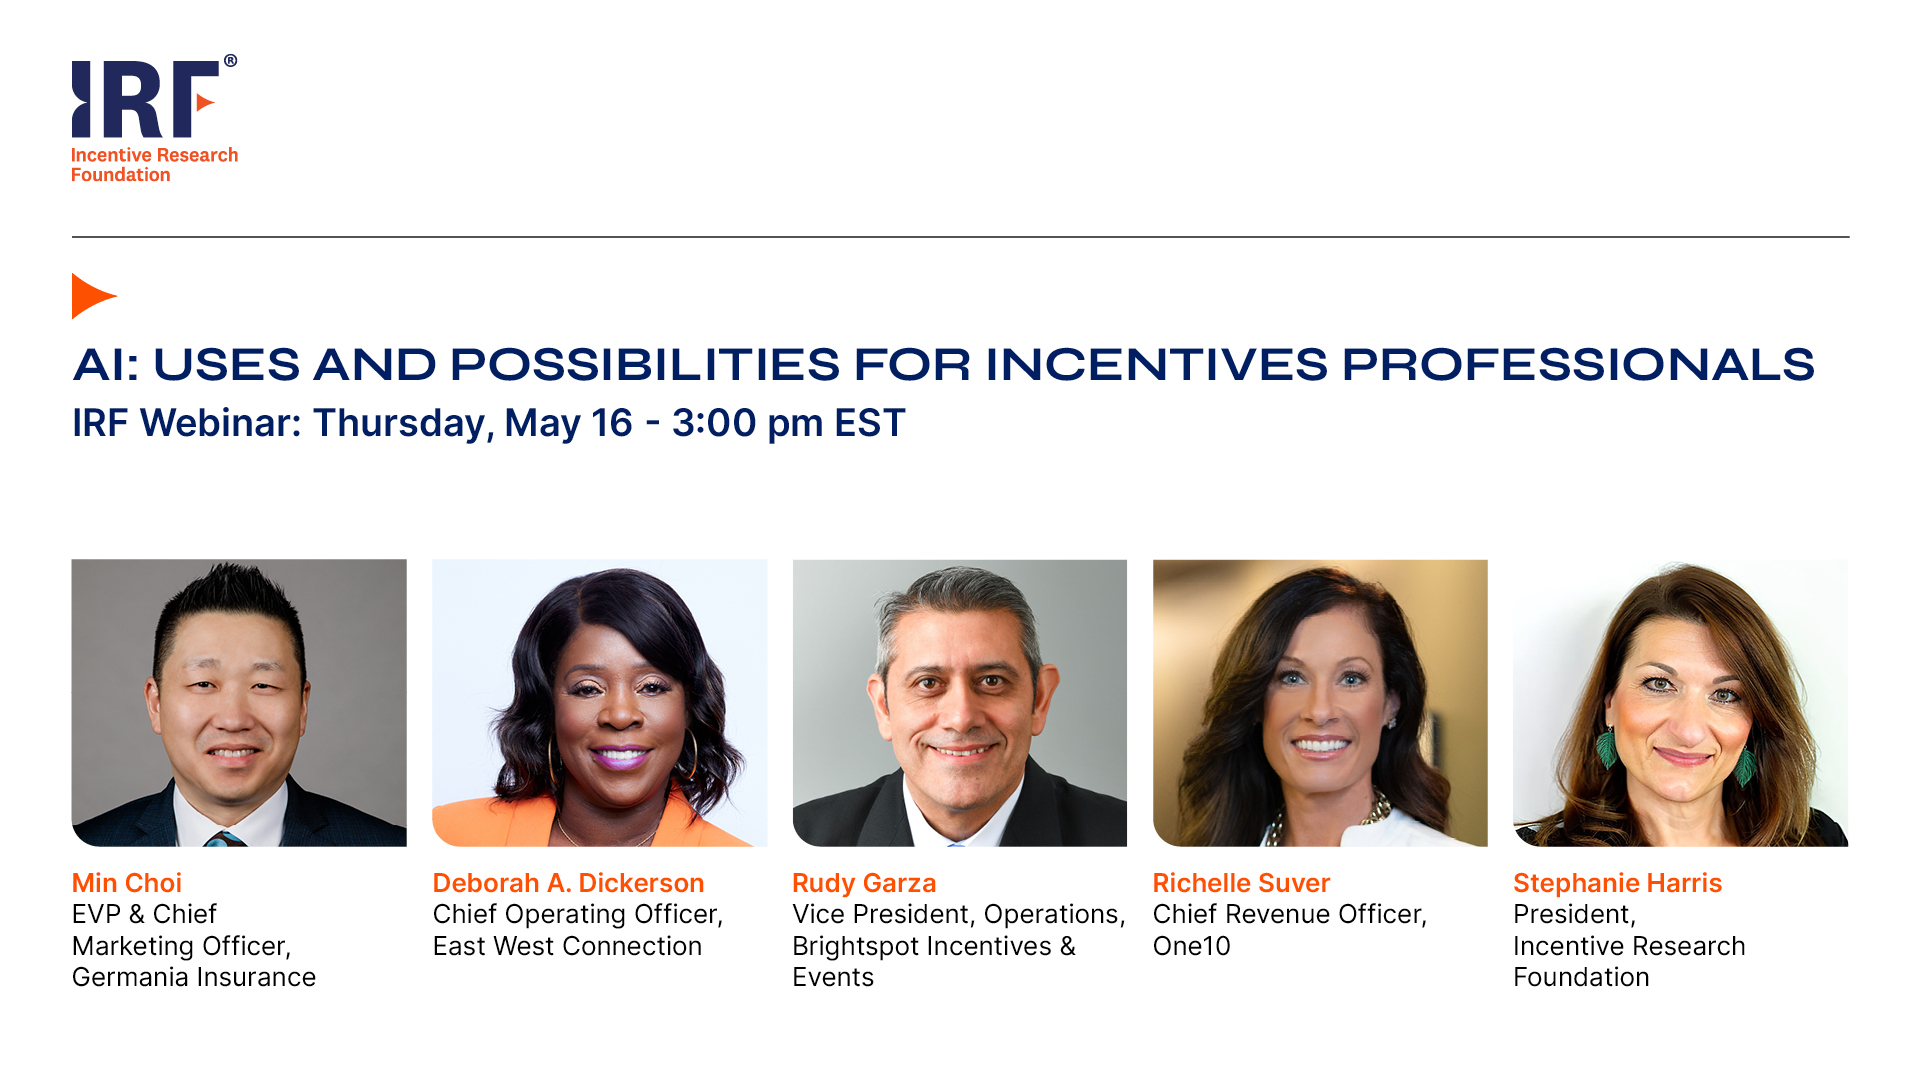 IRF Webinar: AI - Uses and Possibilities for Incentives Professionals